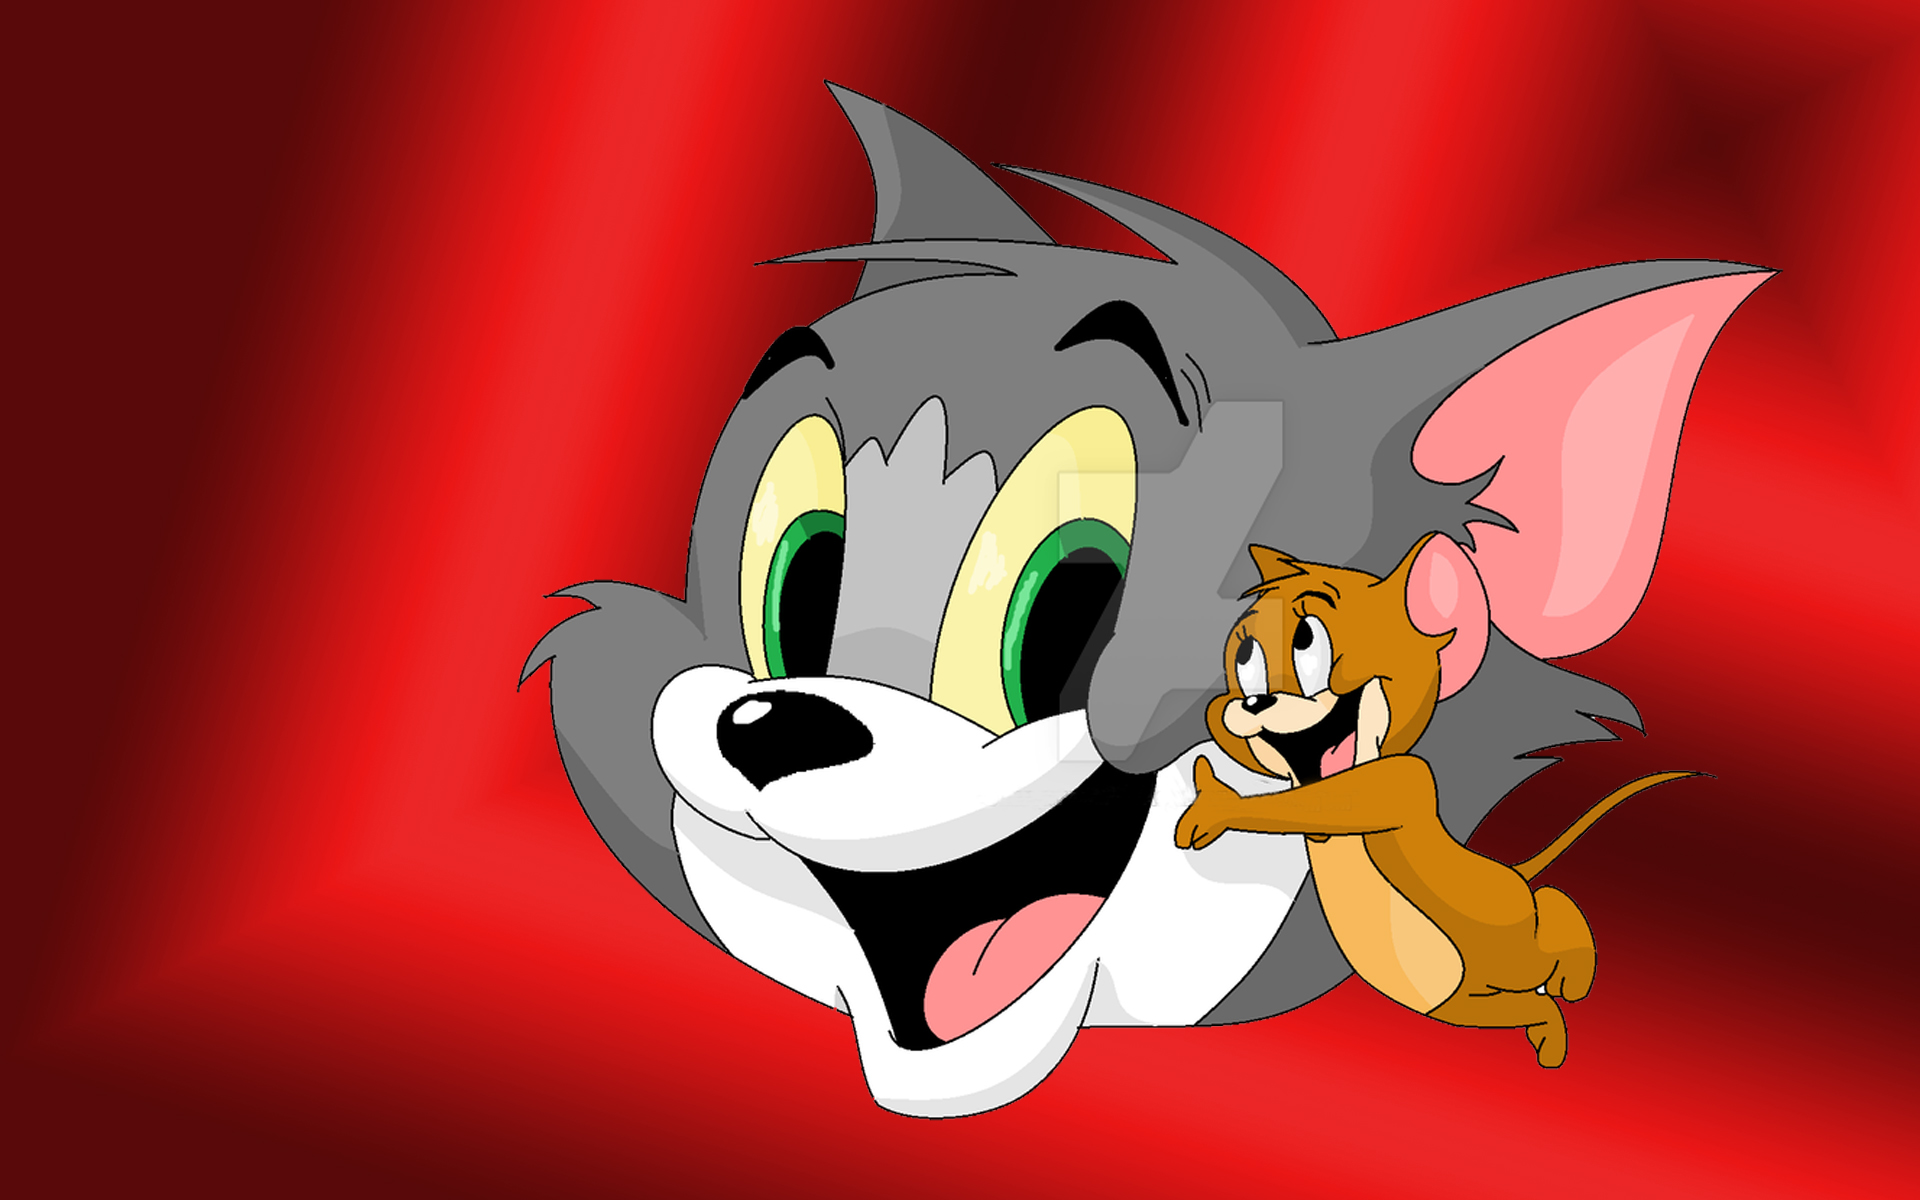 Gallery Photos of "Tom And Jerry Hd Wallpapers" .